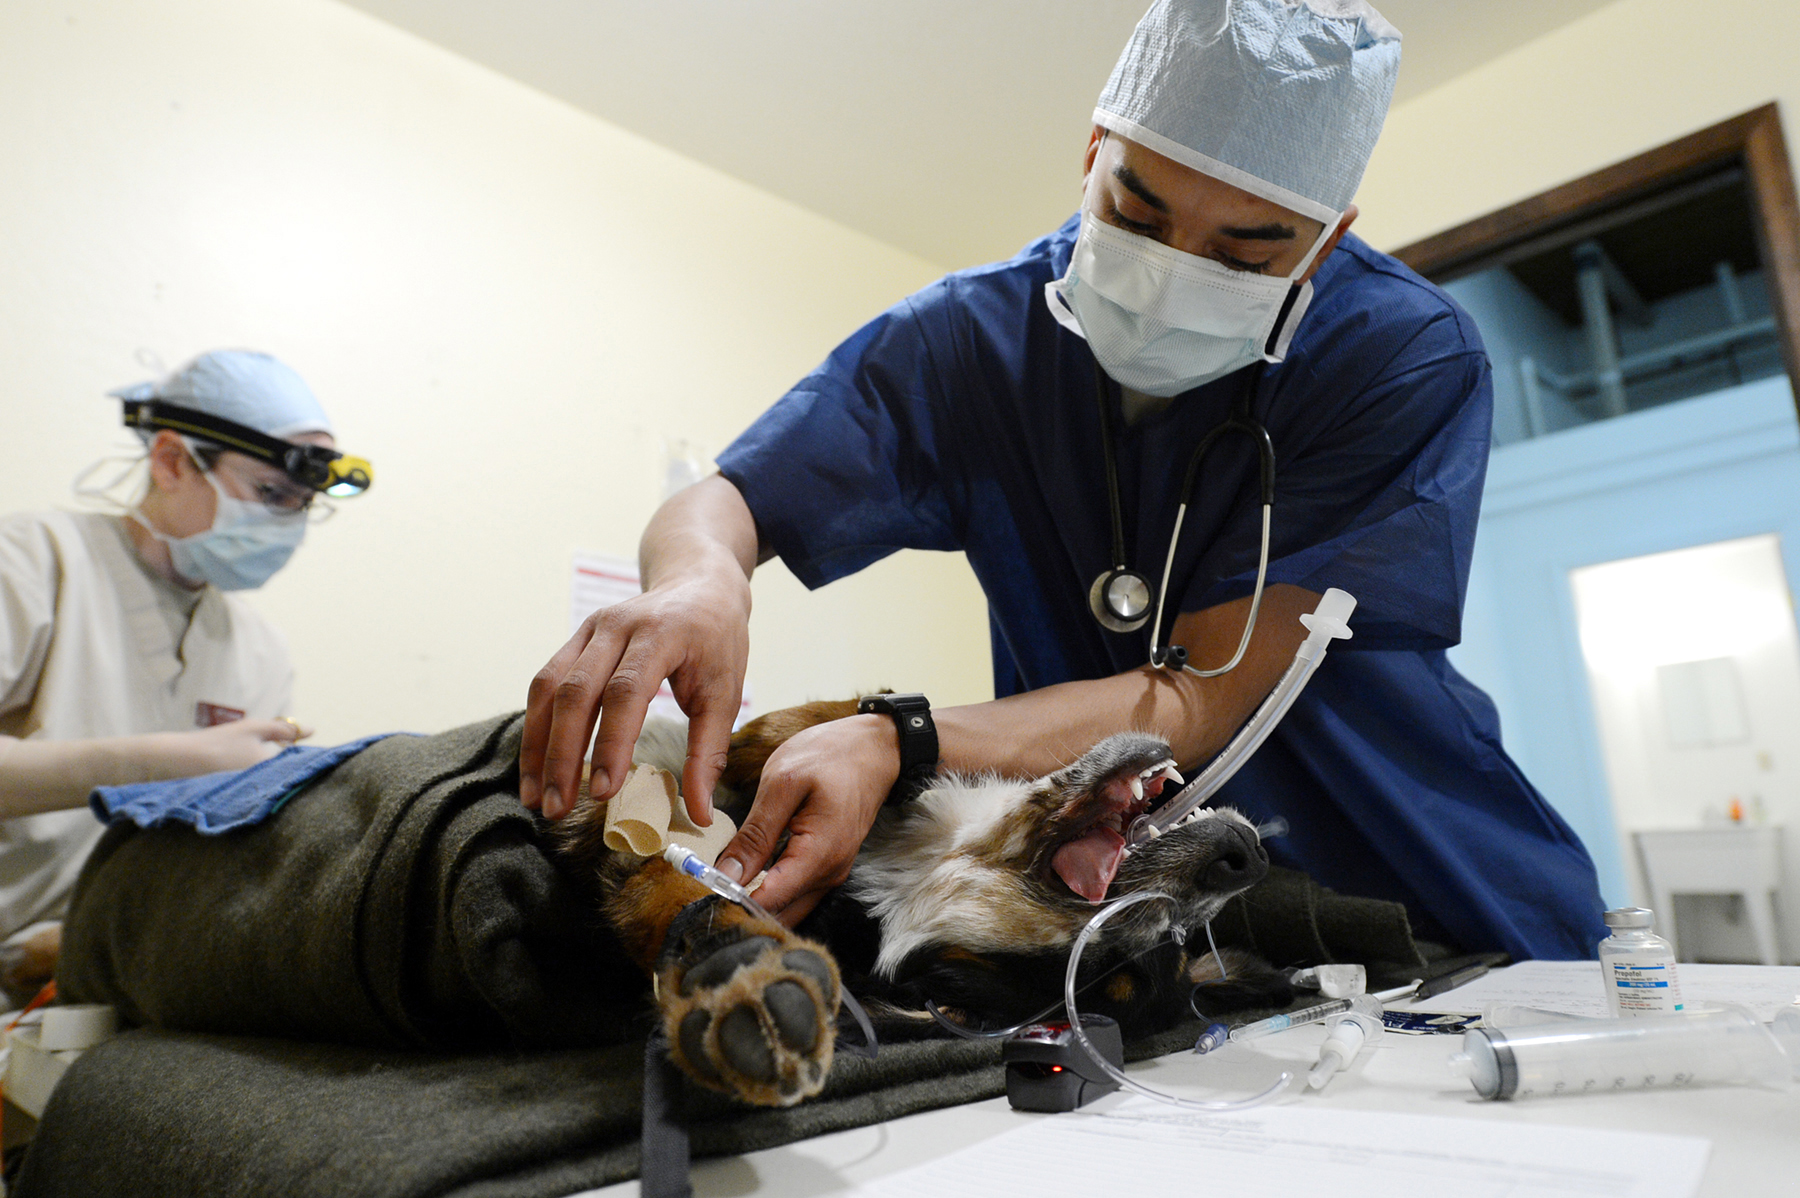 veterinary students perform tasks on a dog that is lying in a bed